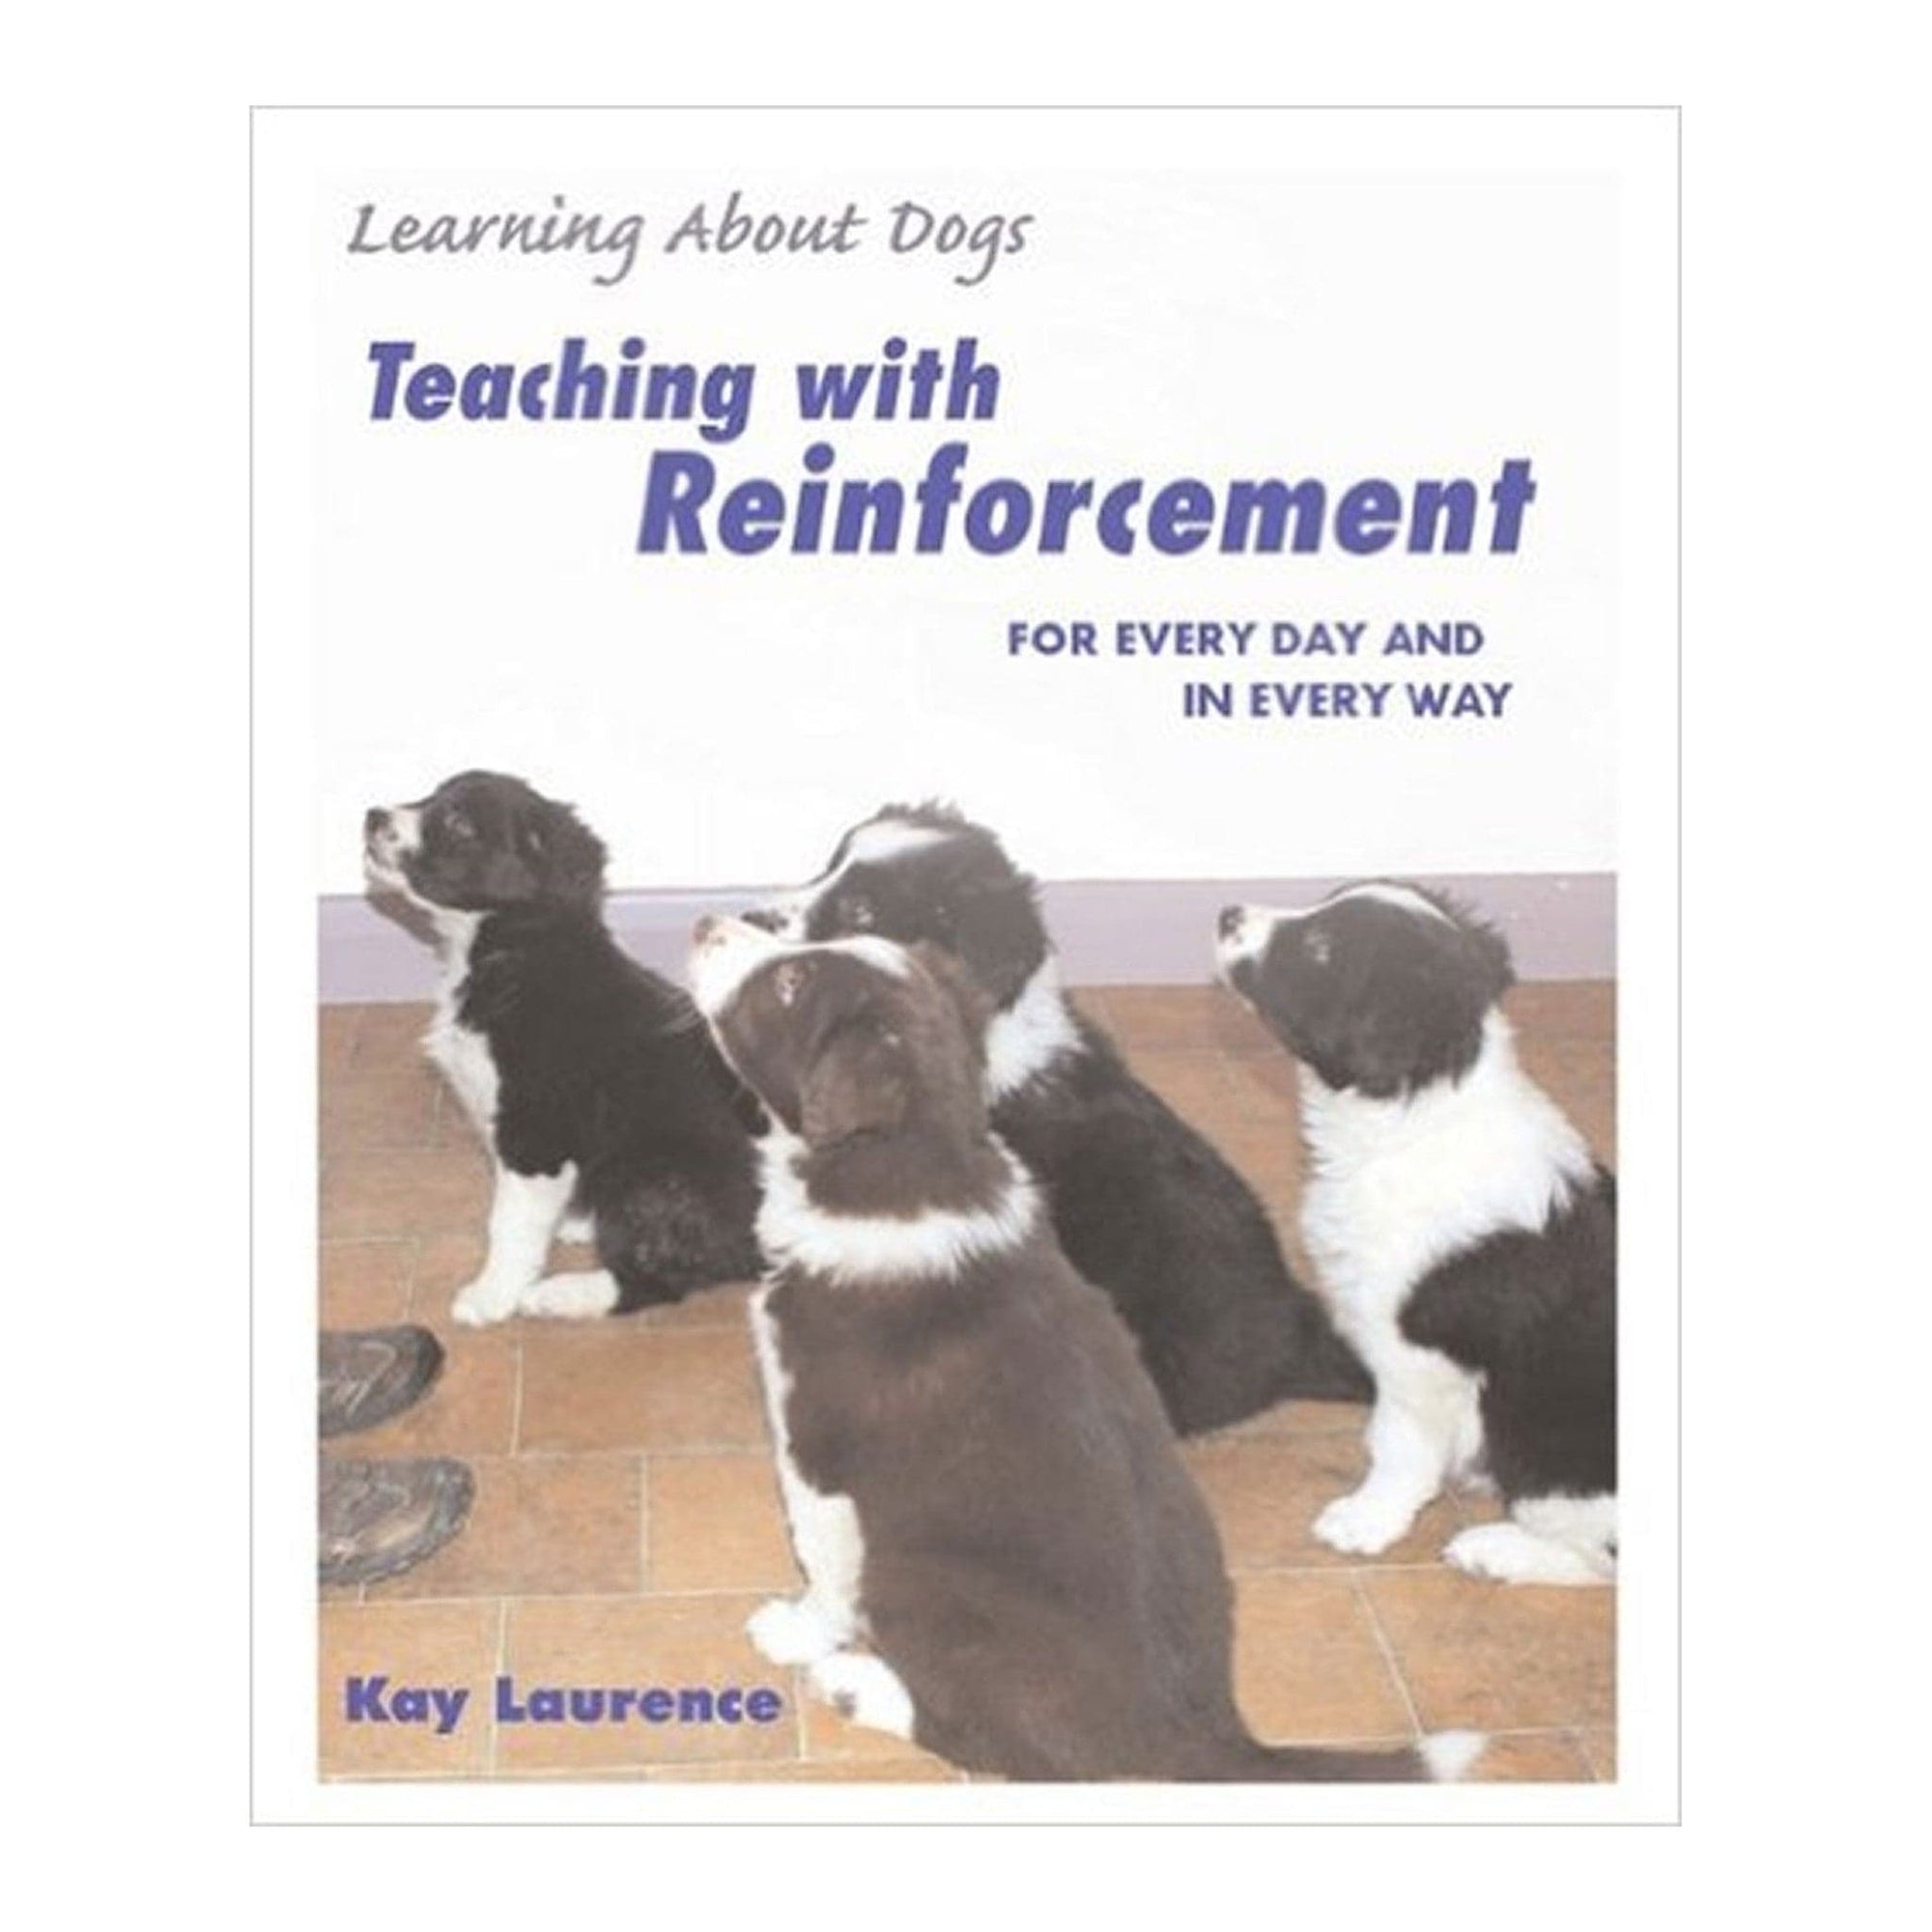 Teaching with Reinforcement